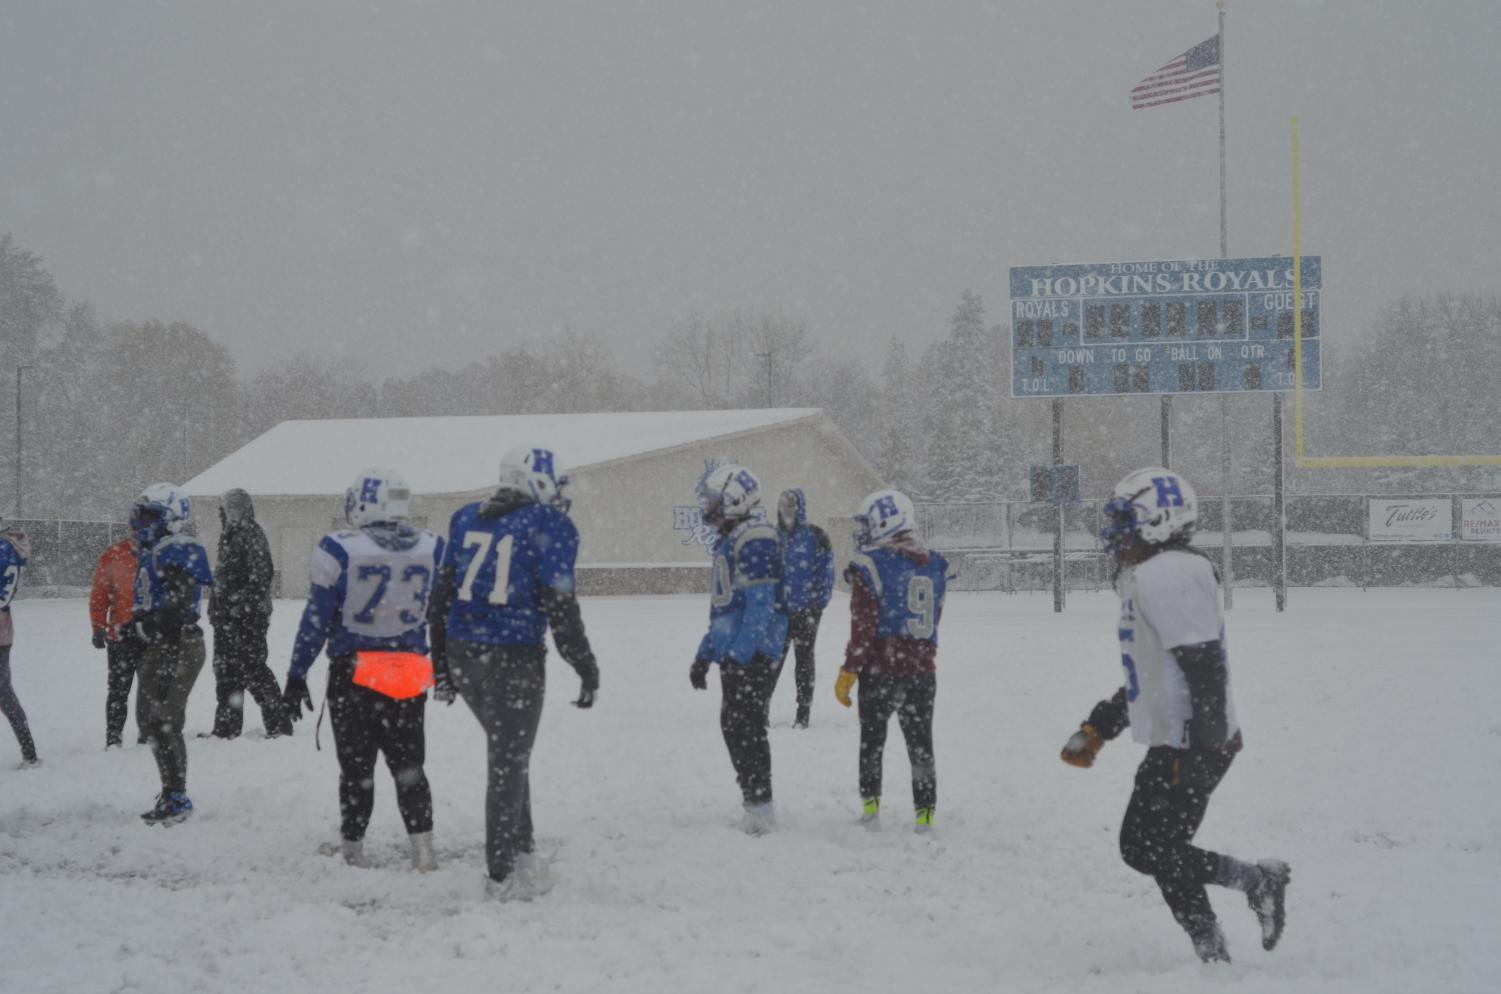 Football+continues+to+practice+despite+severe+weather